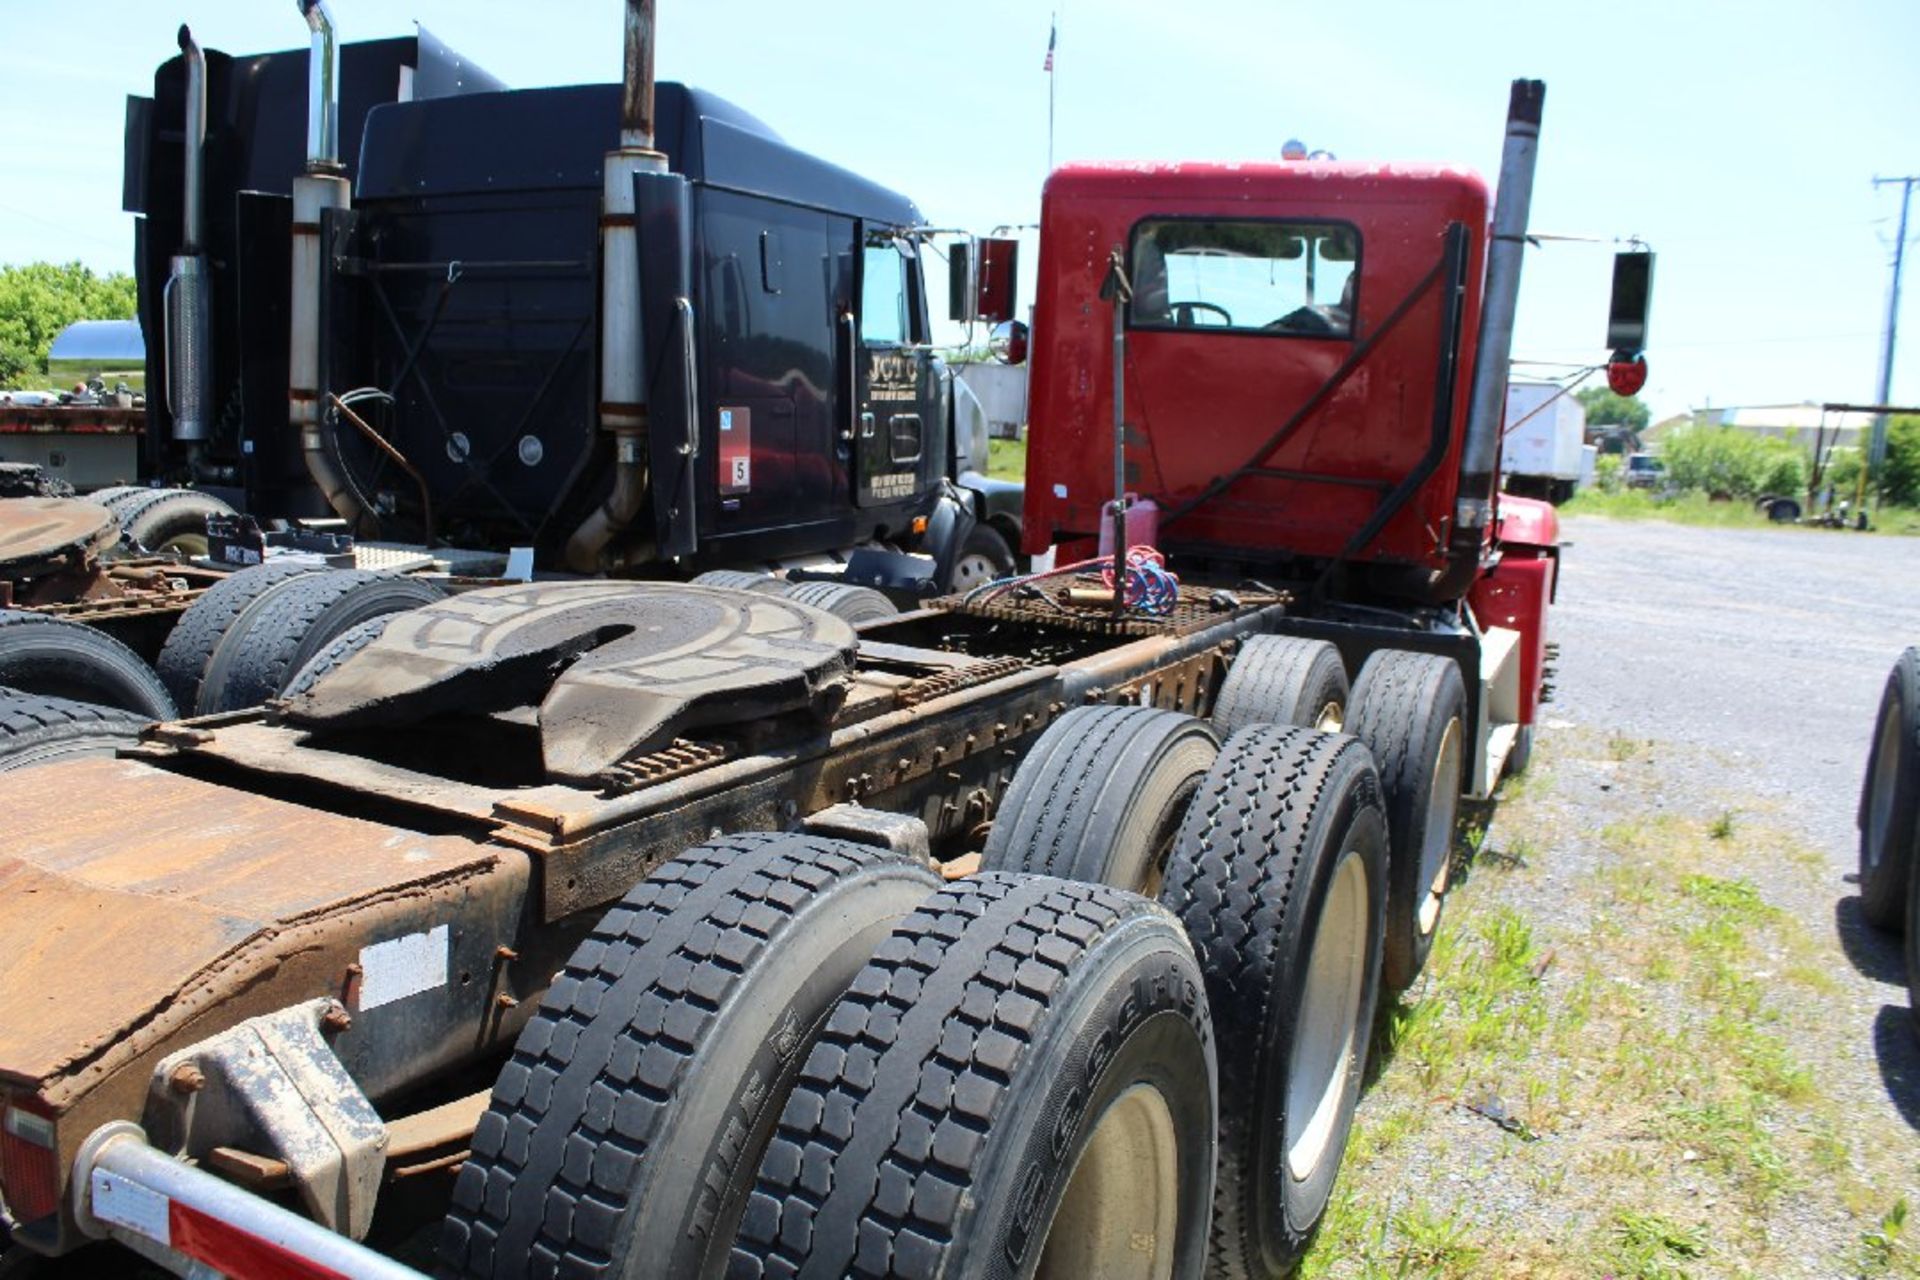 1995 Freightliner Day Cab Road Tractor, Tandem Axle with Bogies, CAT 3406 Diesel, 10 Speed, 236, - Image 3 of 5